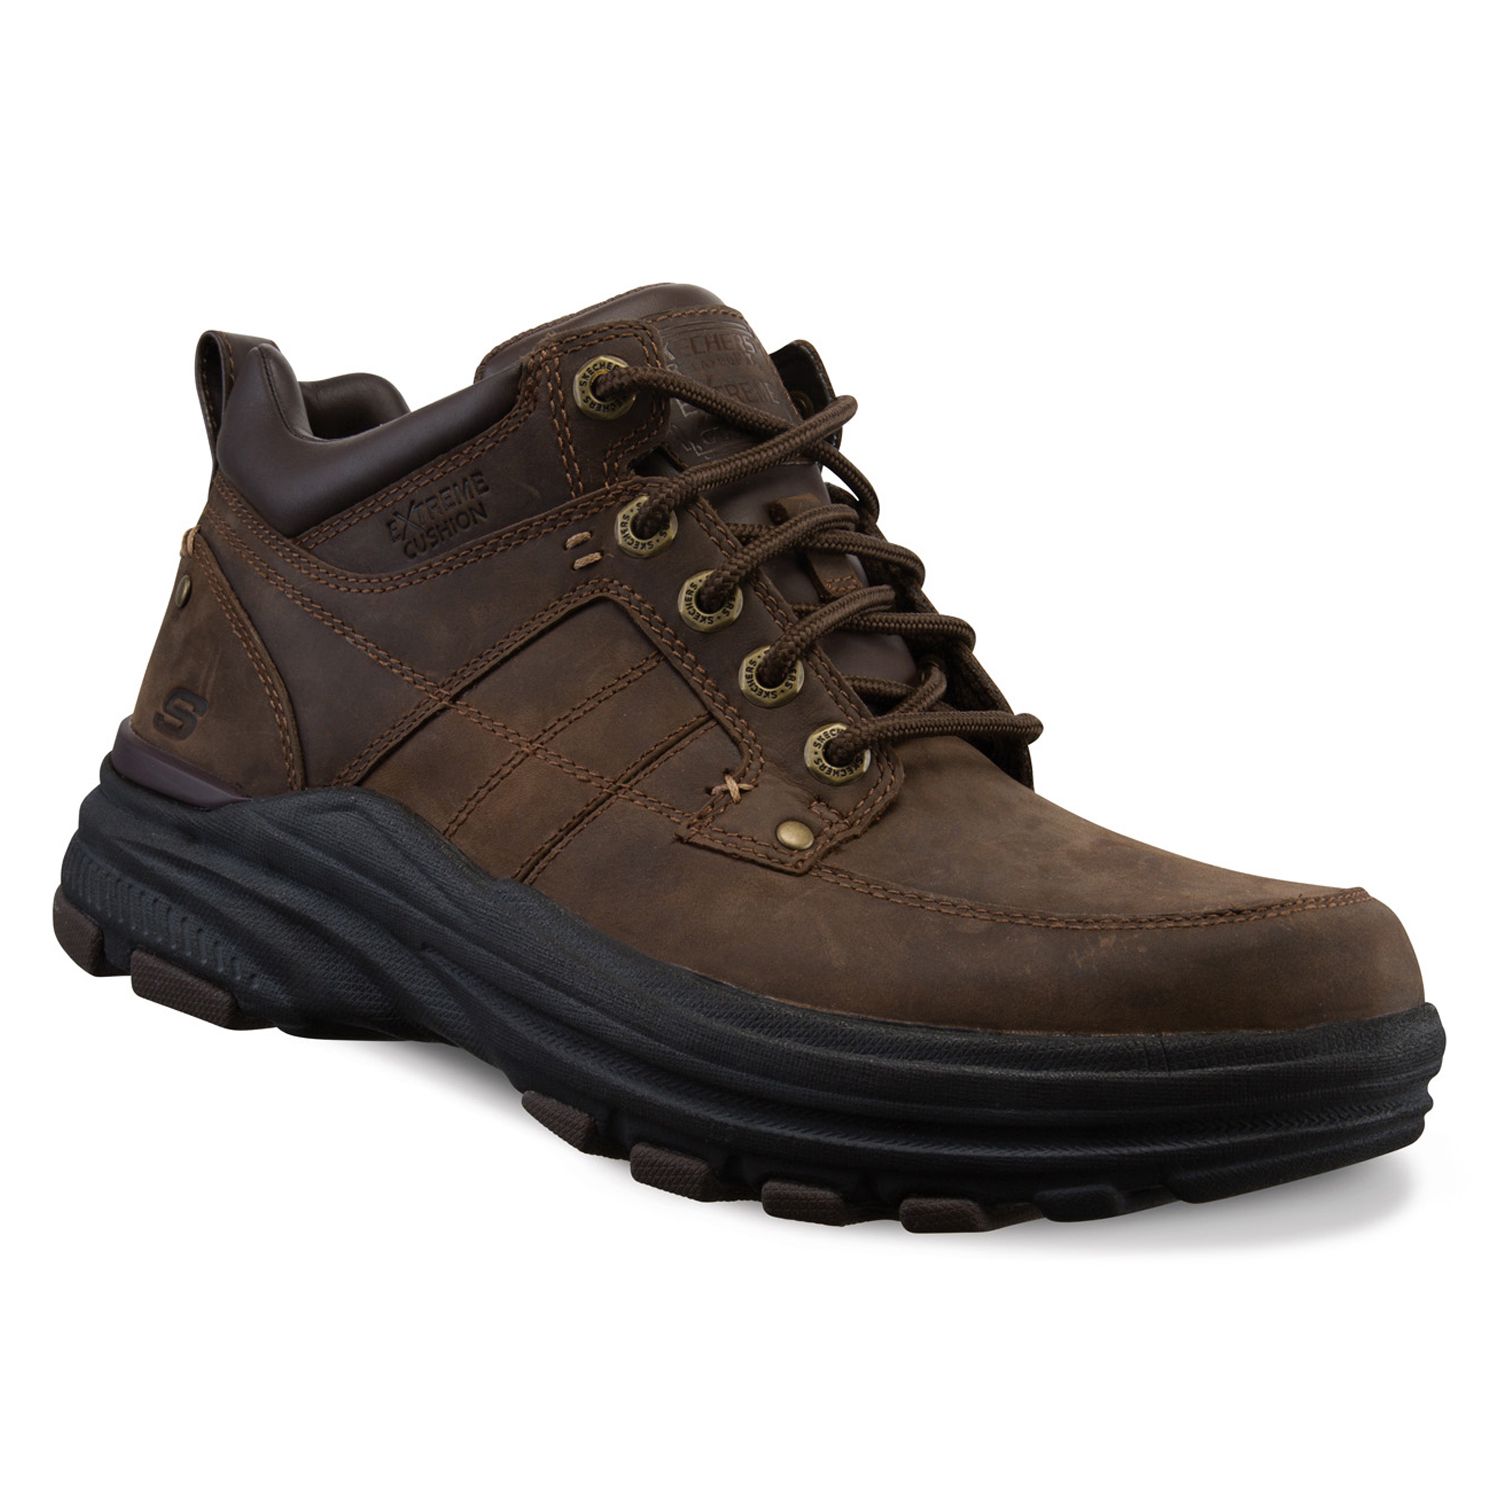 skechers relaxed fit extreme cushion boots